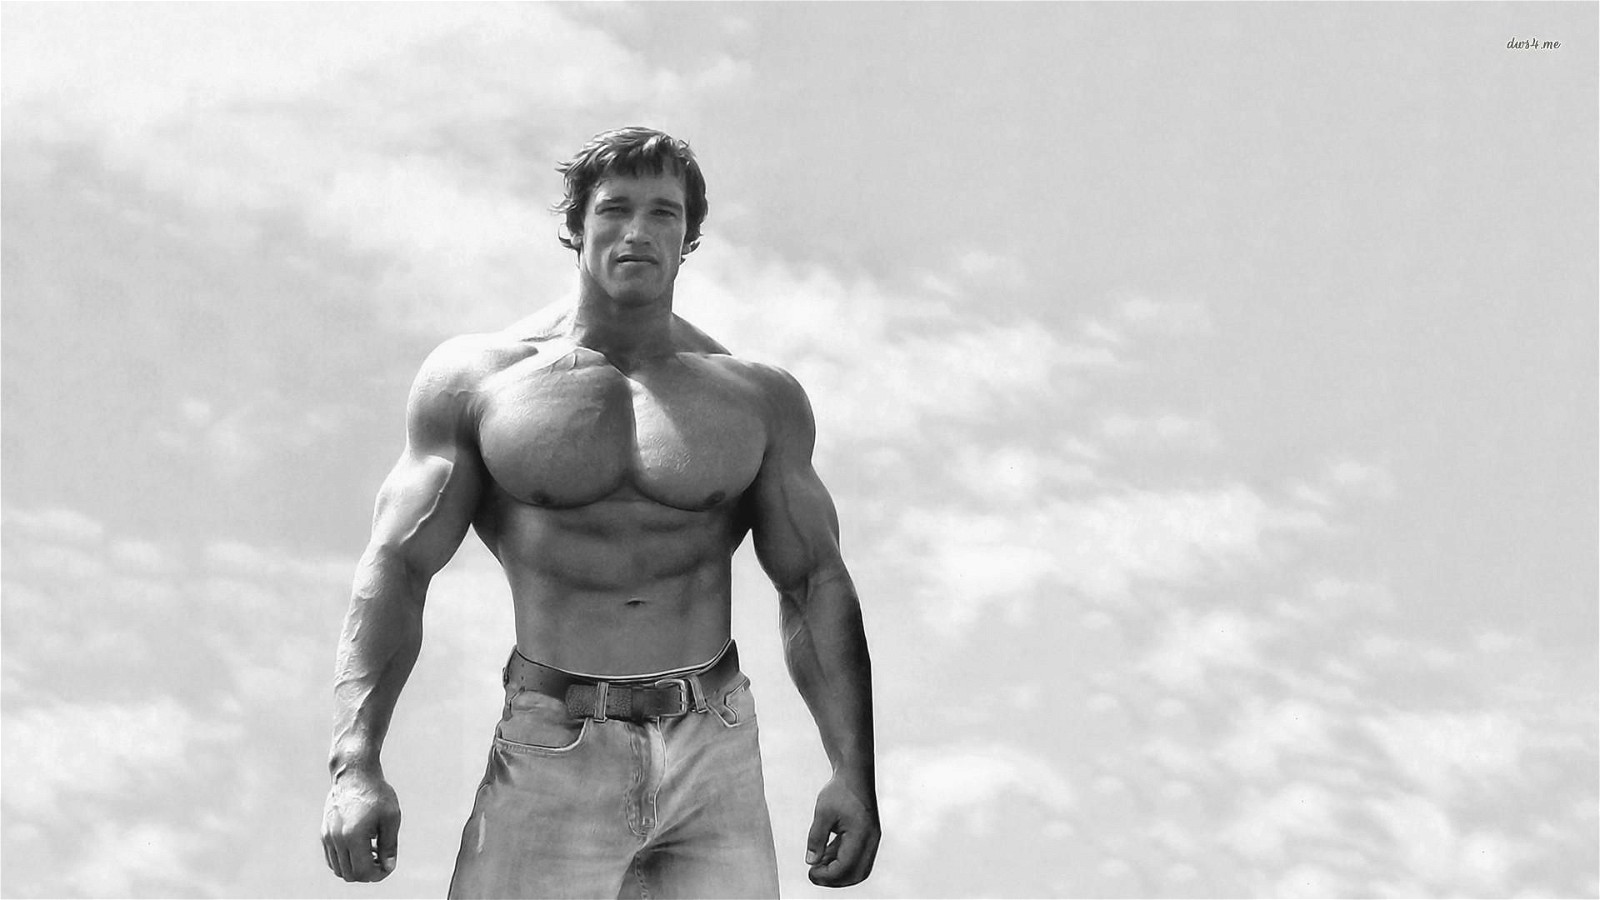 Arnold Schwarzenegger in his young age